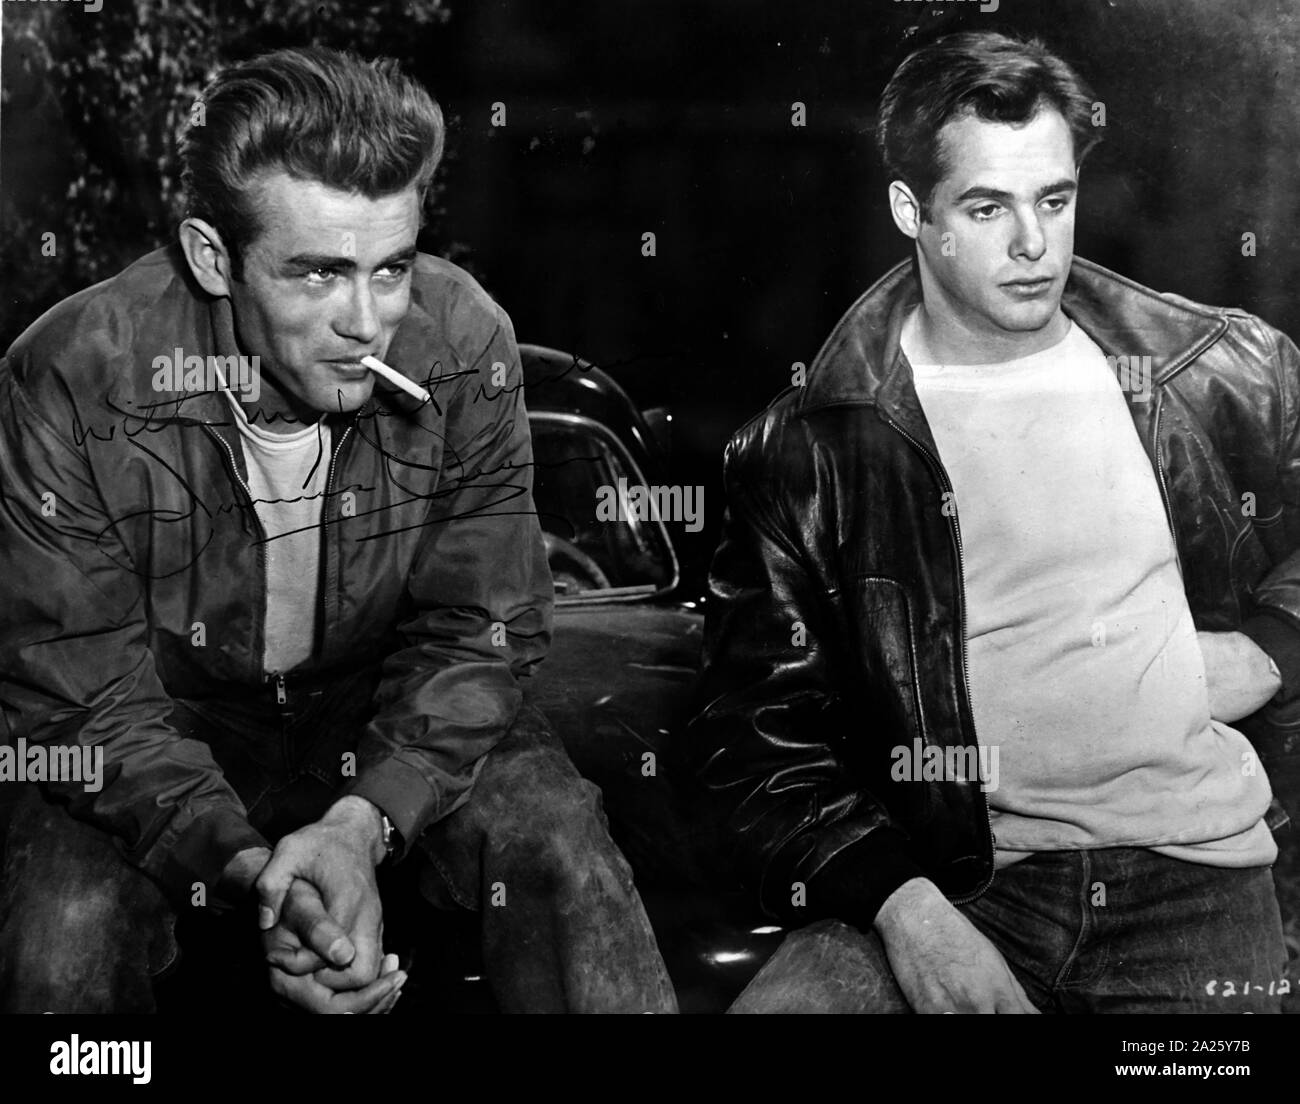 An Autographed Photograph Of James Dean And Marlon Brando James Dean 1931 1955 An American Actor Marlon Brando 1924 04 An American Actor And Film Director Stock Photo Alamy